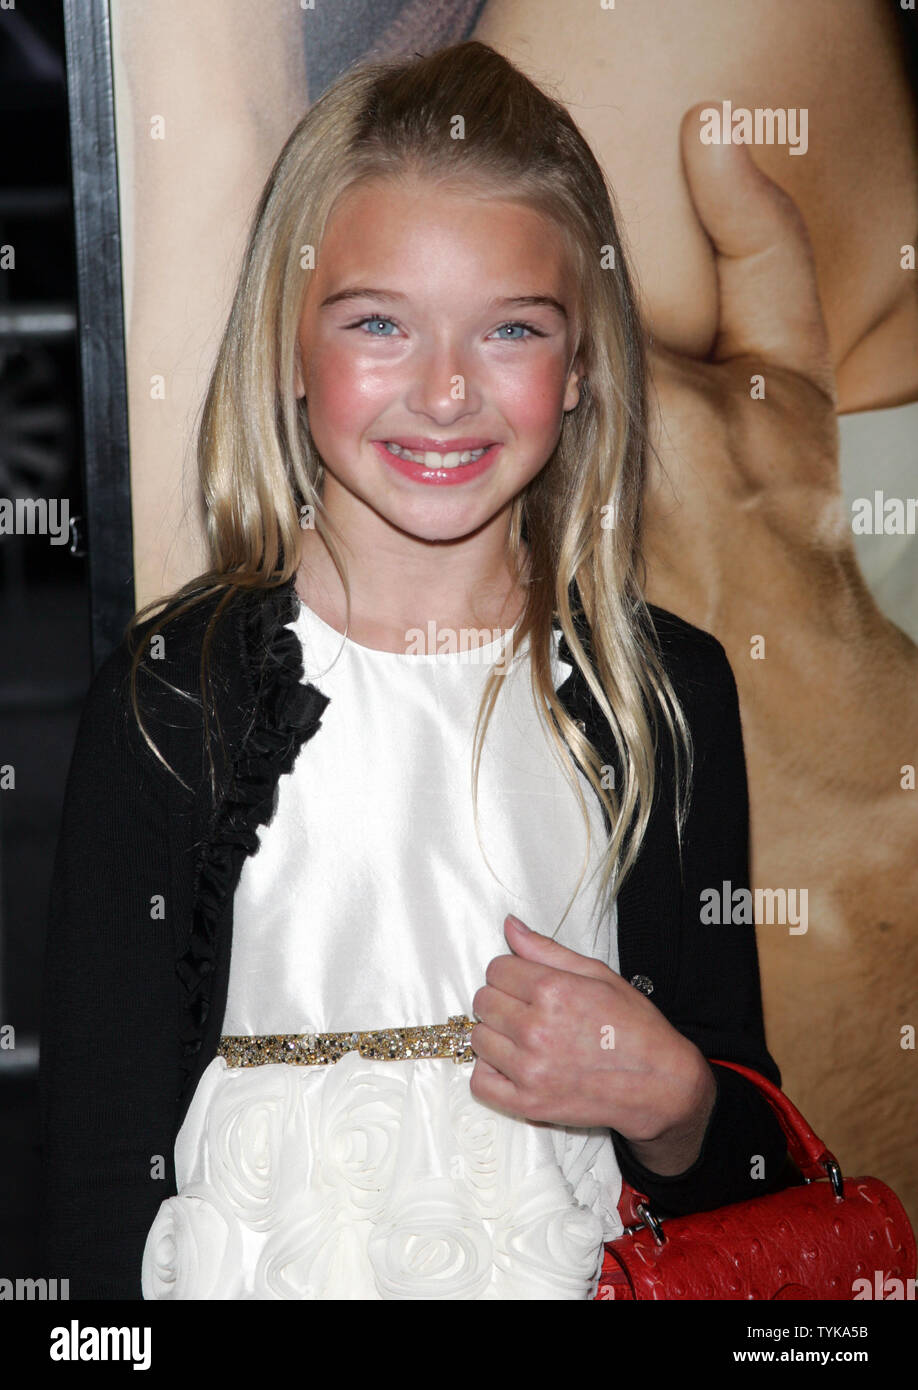 Brooklynn Proulx arrives for the premiere of "The Time Traveler's Wife" at the Ziegfeld Theatre in New York on August 12, 2009.       UPI Photo/Laura Cavanaugh Stock Photo